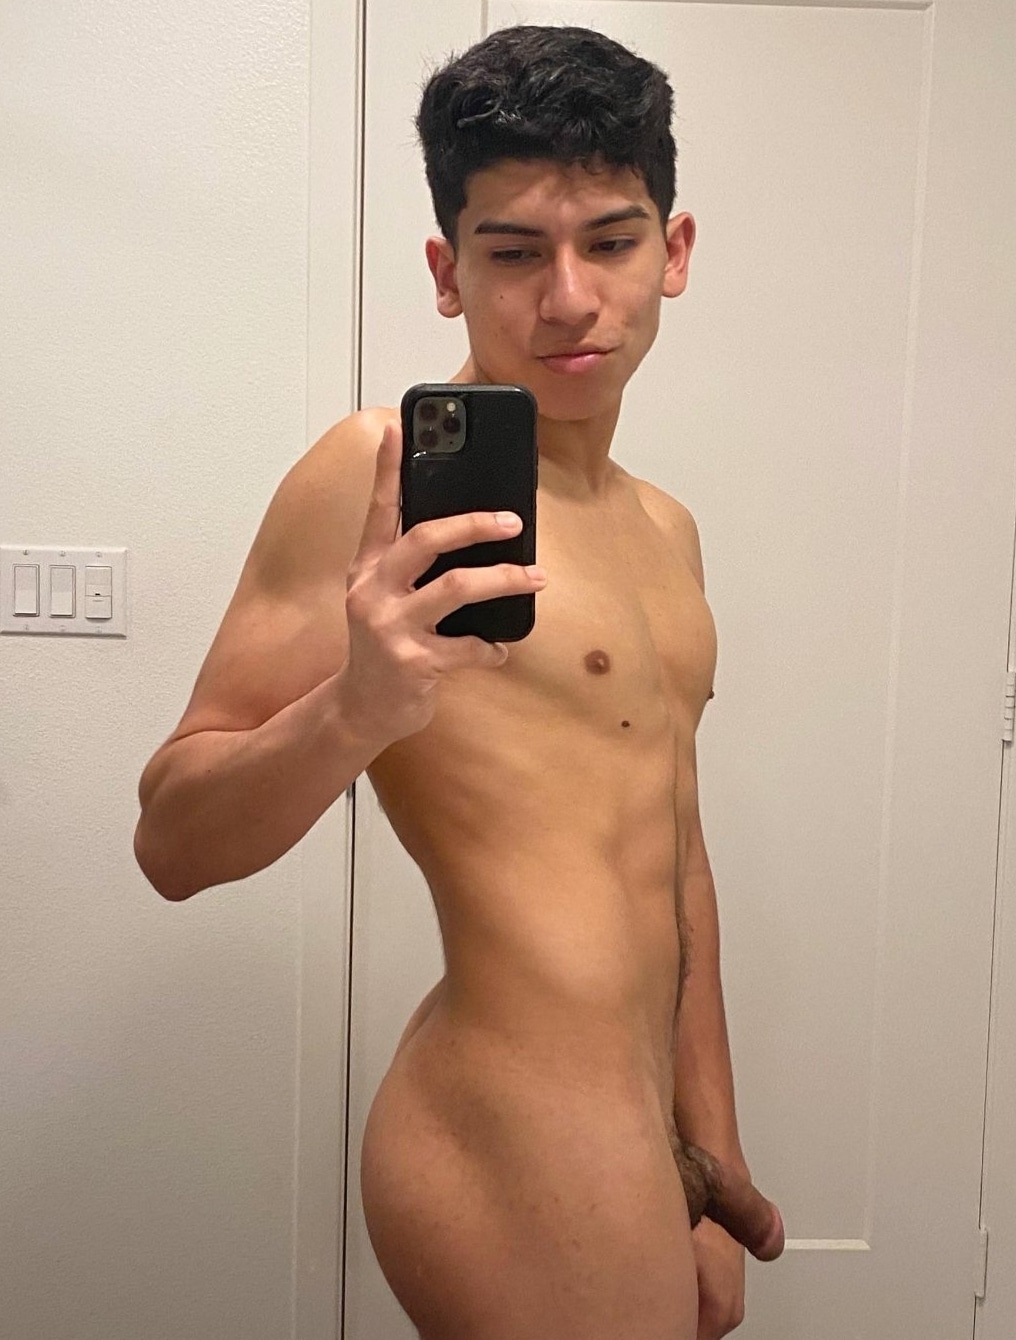 Nude selfie boy with a hot body